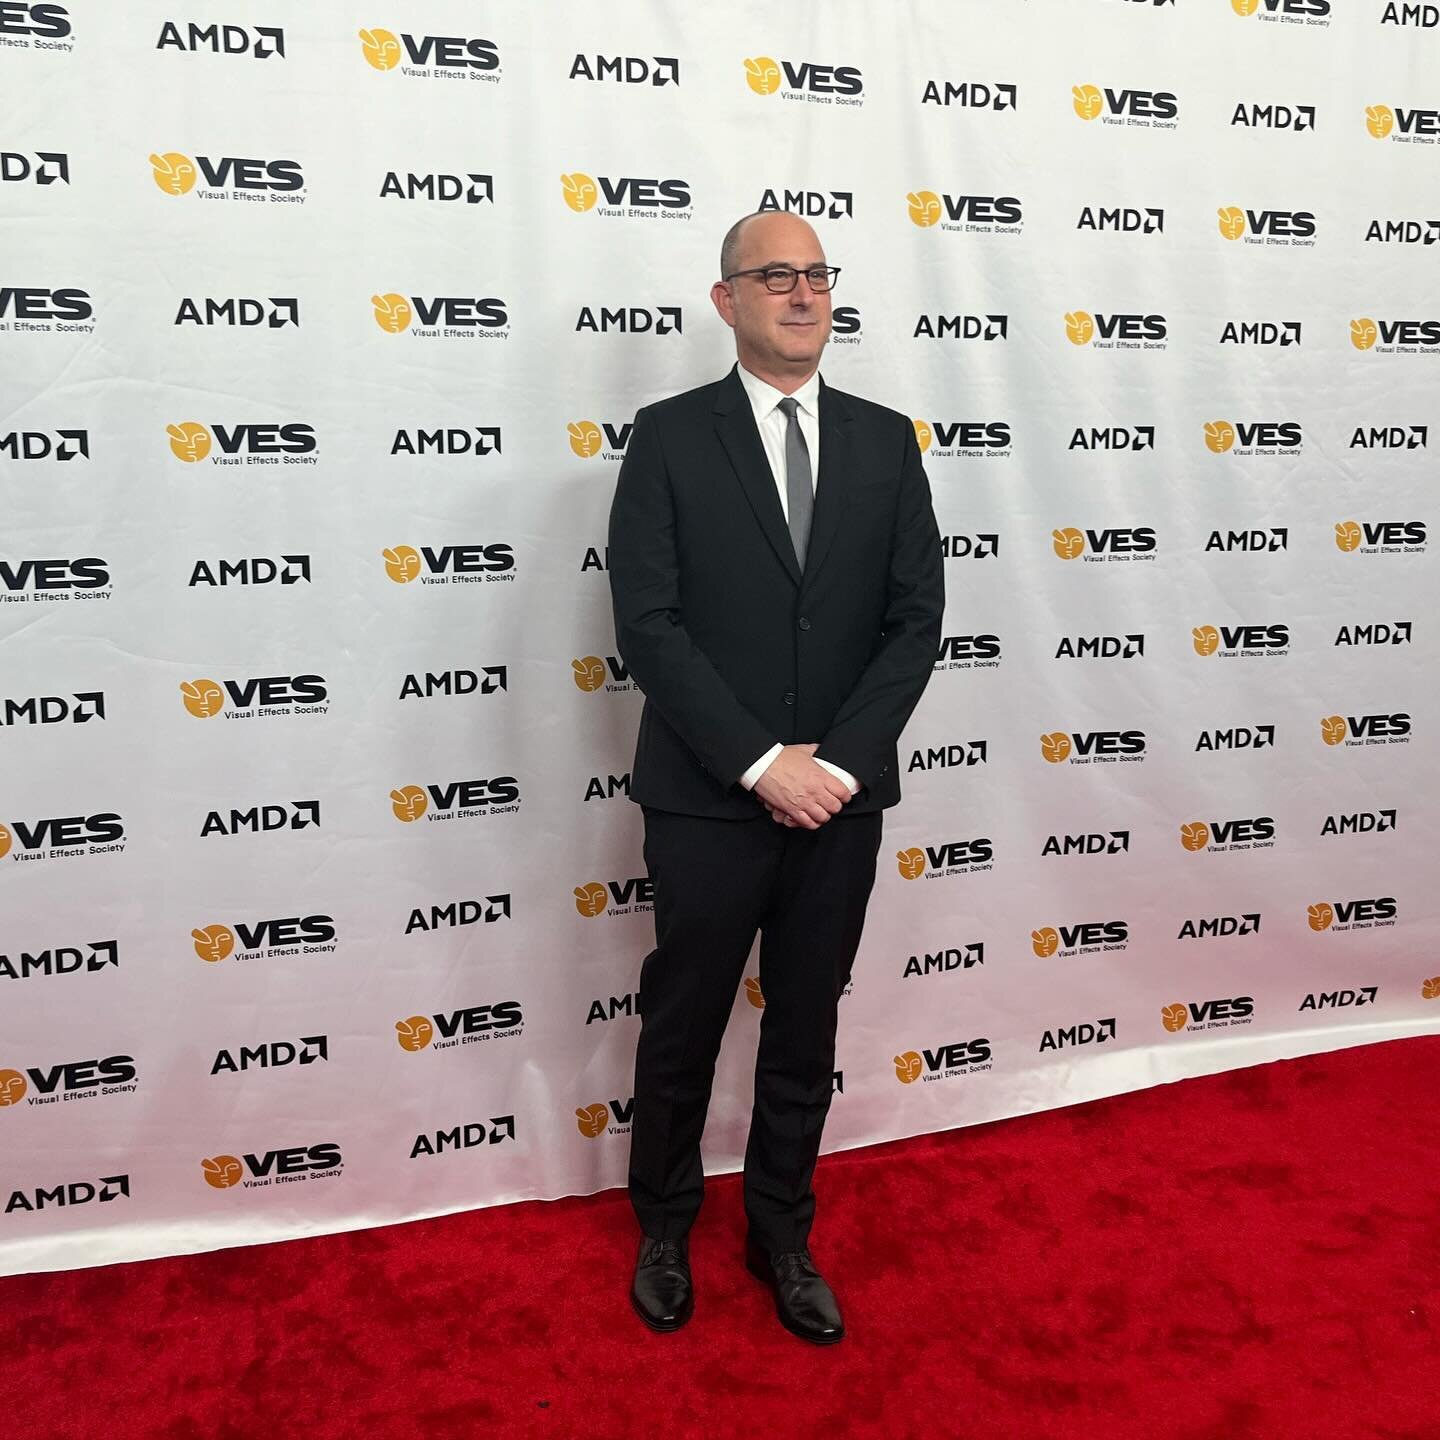 A fantastic evening last night for @proof_previs at the #vesawards . Congratulations to all nominees and especially the Proof teams and collaborators on V.E.S. Award Winners @creatorthefilm and @nyadmovie !

1. Proof, Inc. Founder &amp; President, Ro